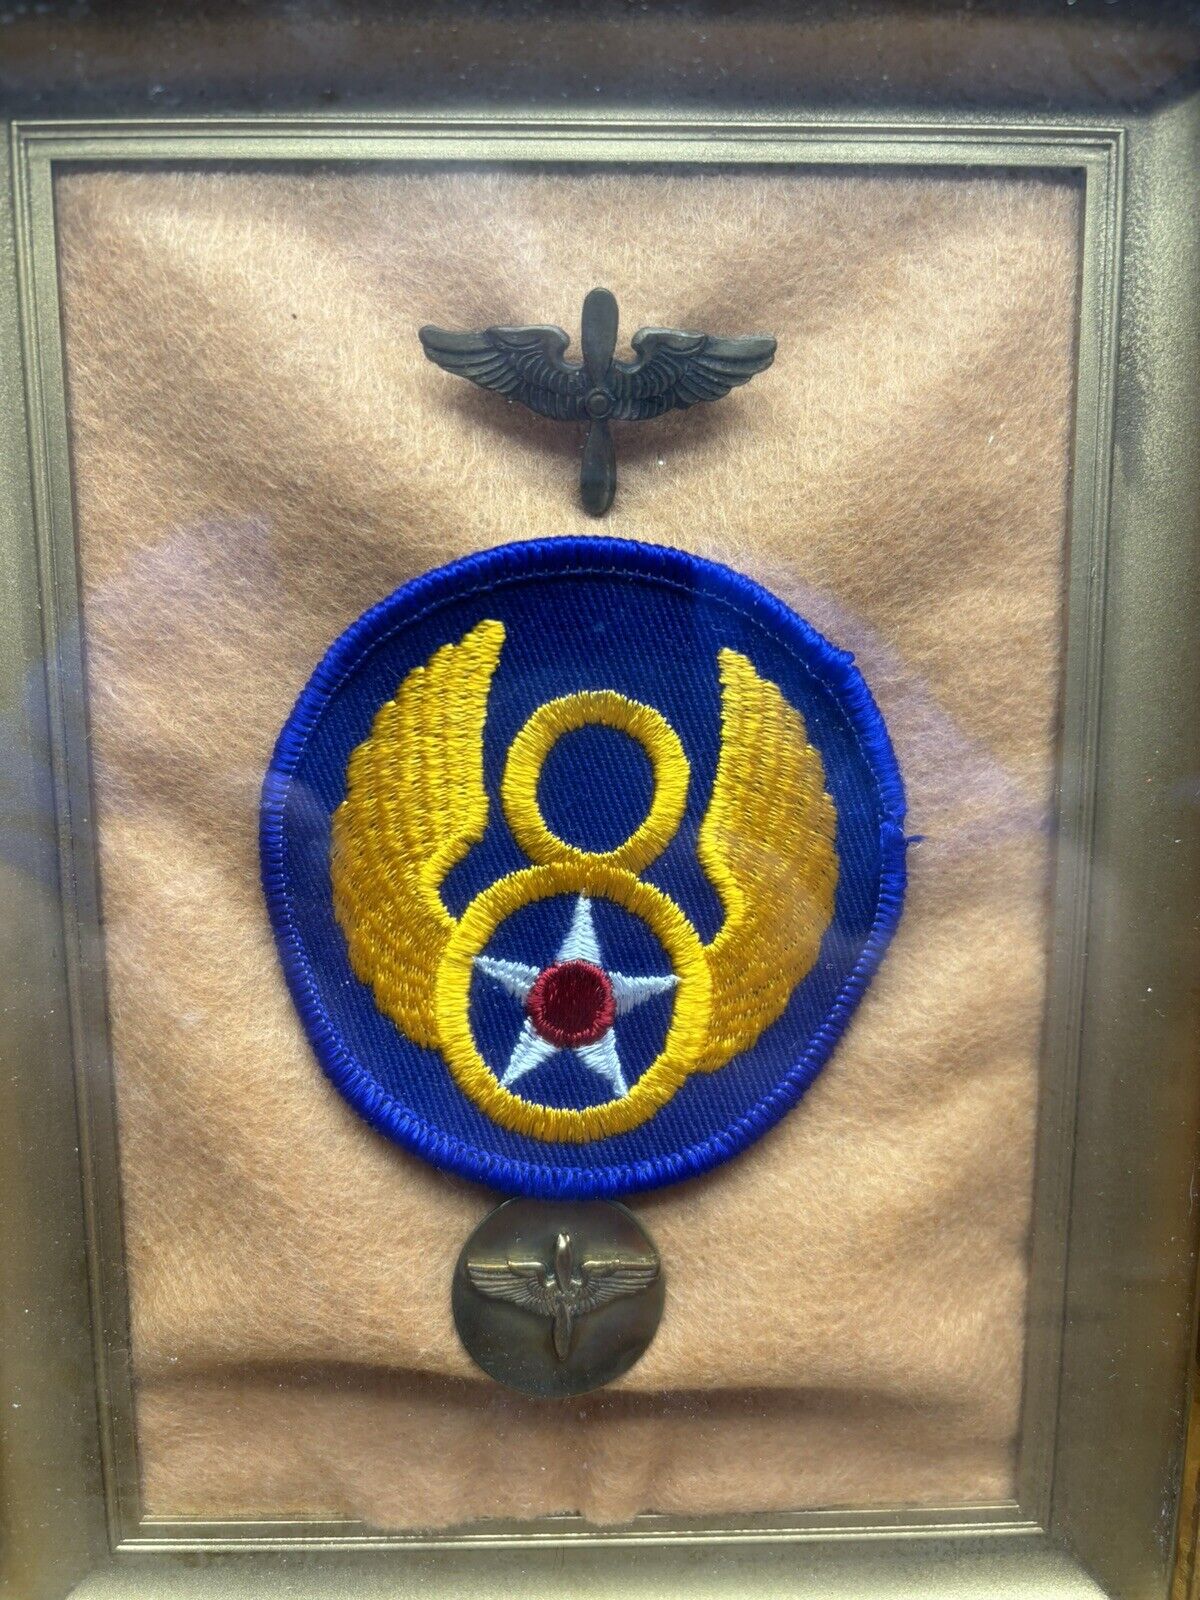 USAAF 8th Air Force Patch Pins In Shadow Box WWII Reproduction Army Air Forces